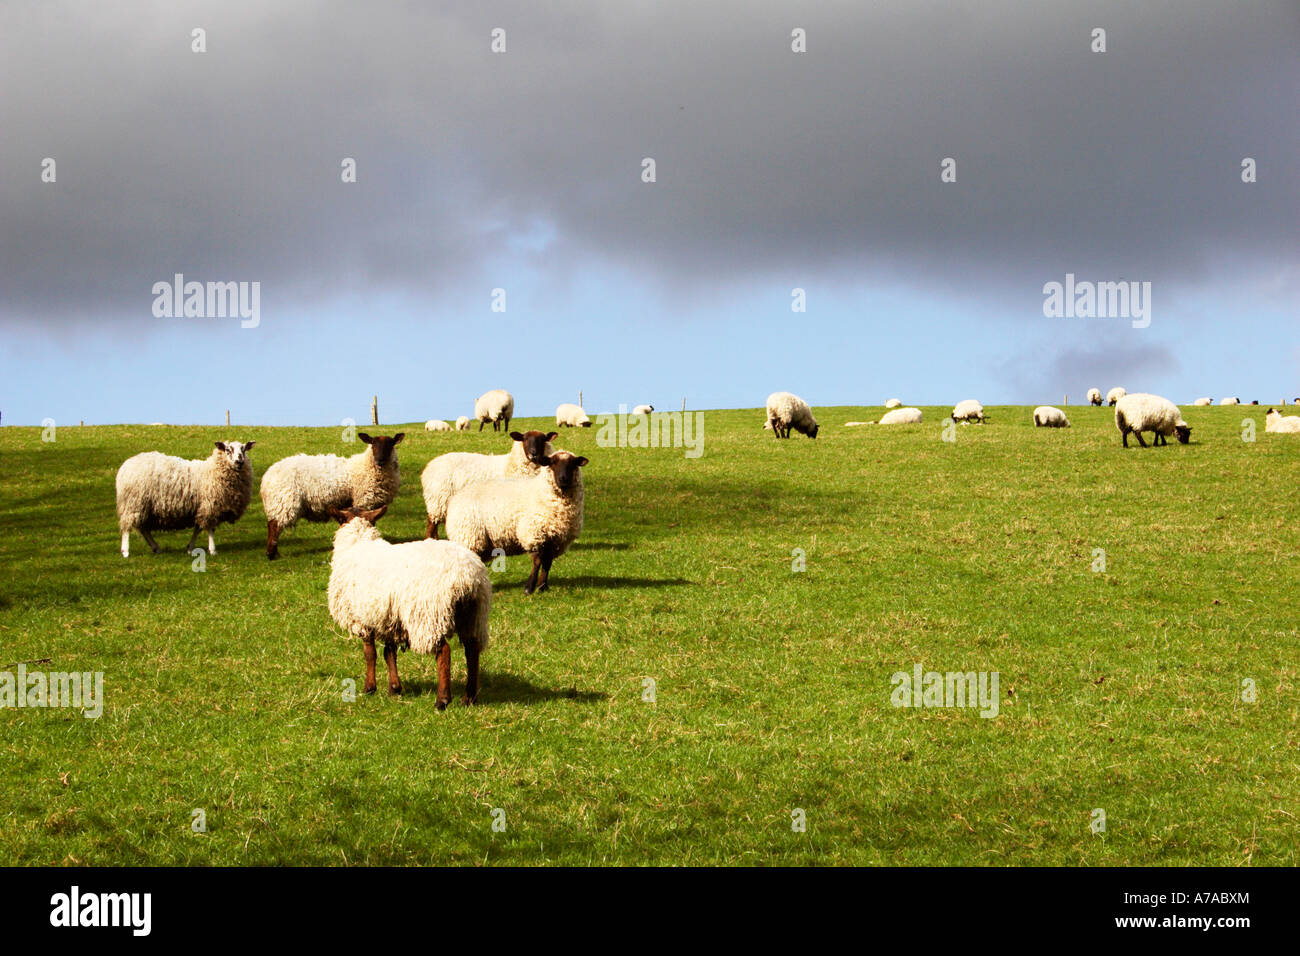 Sheep in a field in Dorset, England. Stock Photo